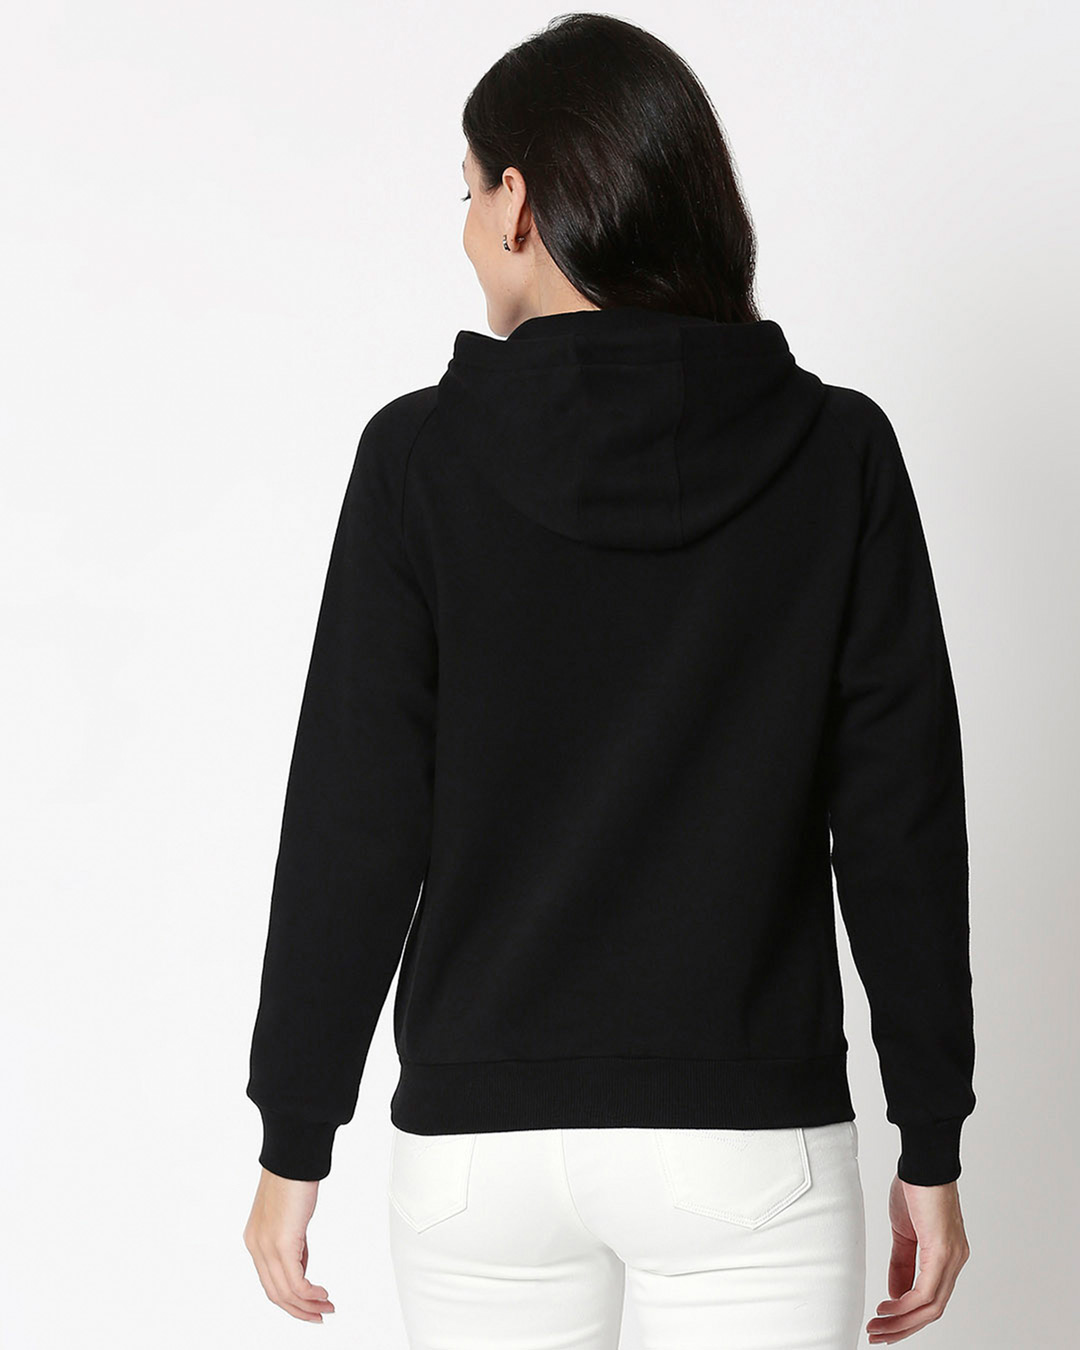 Shop Out Of The World Sweatshirt Hoodie Black-Back